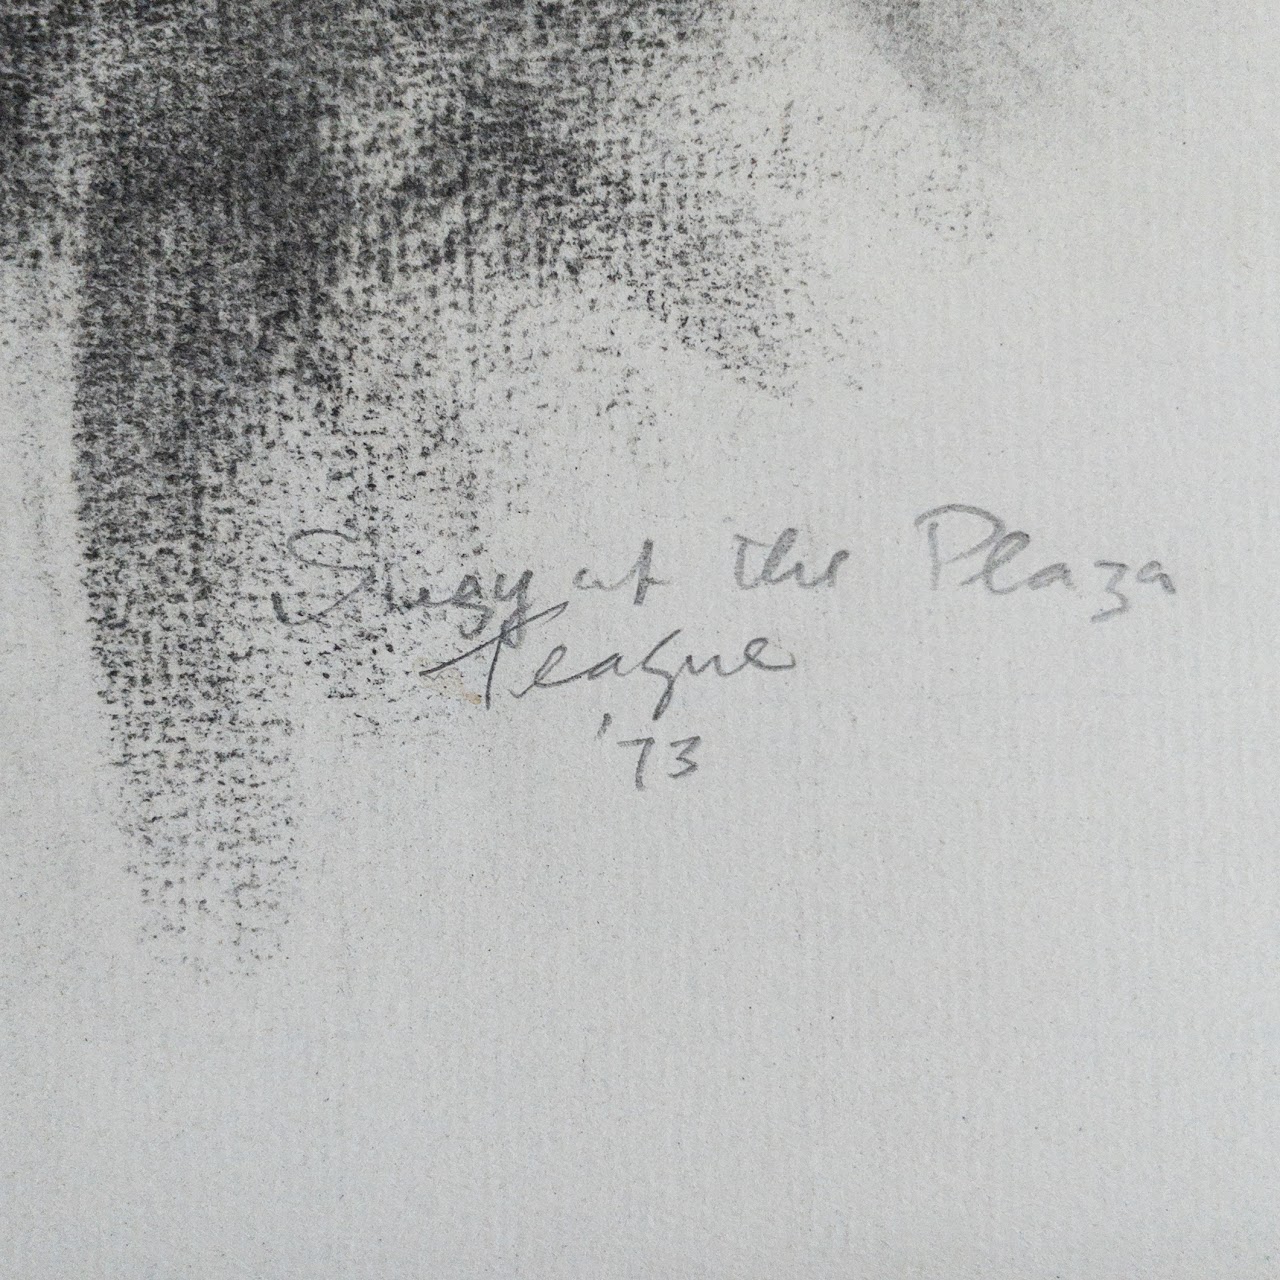 Lewis Teague Signed Charcoal 'Suzy of the Plaza' Drawing